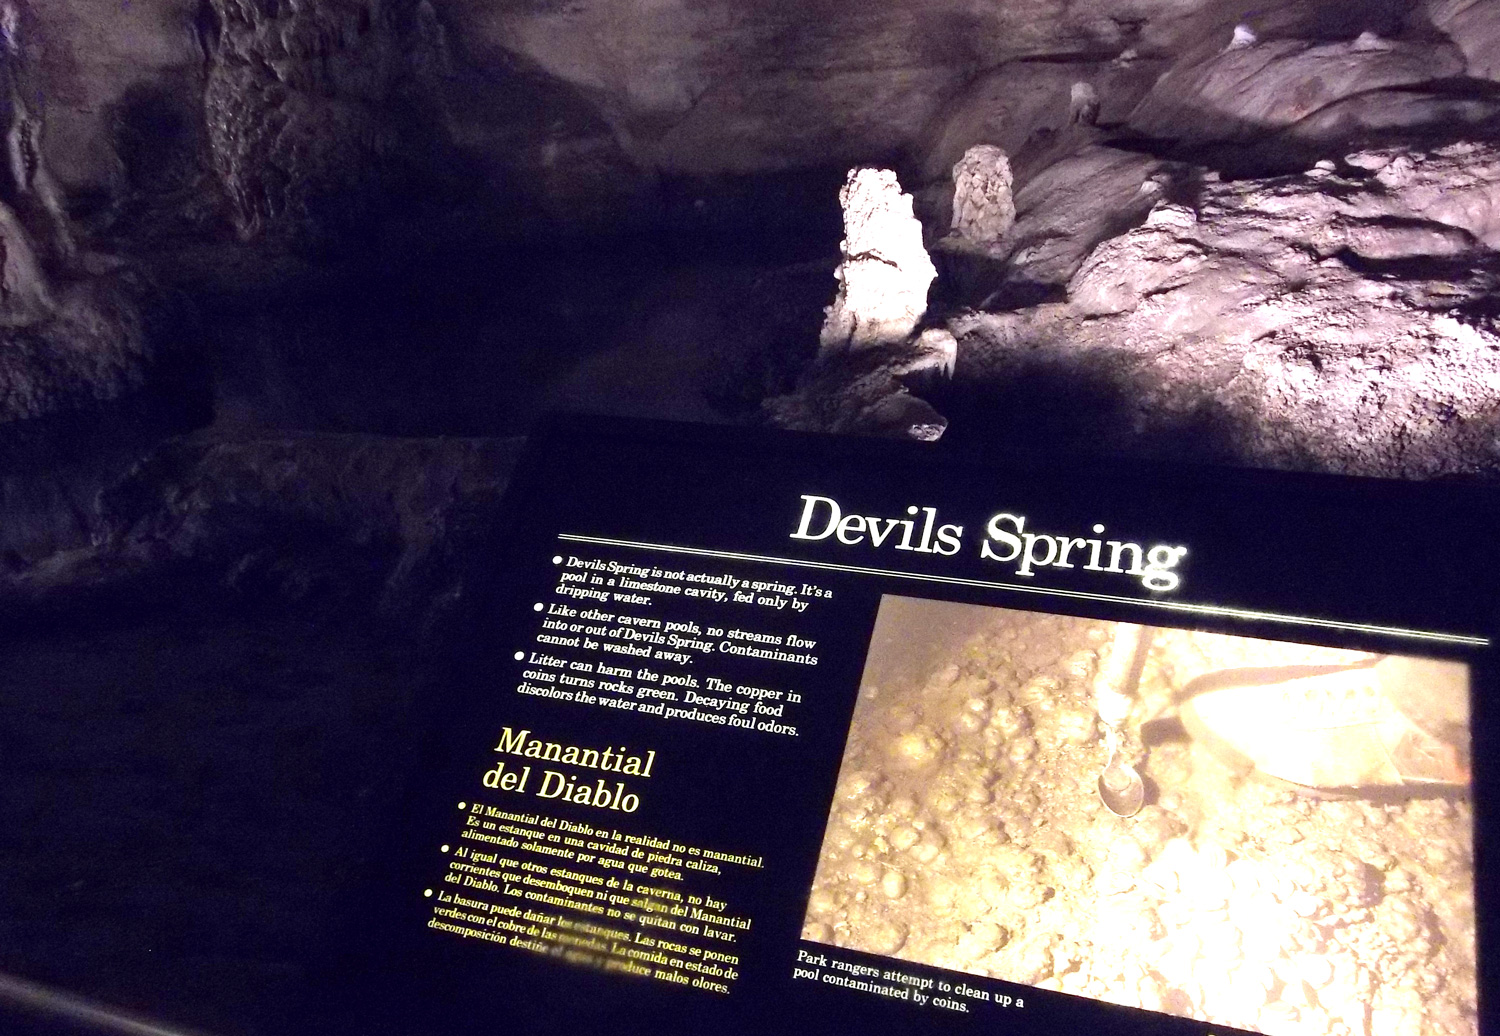 A sign about Devil's Spring